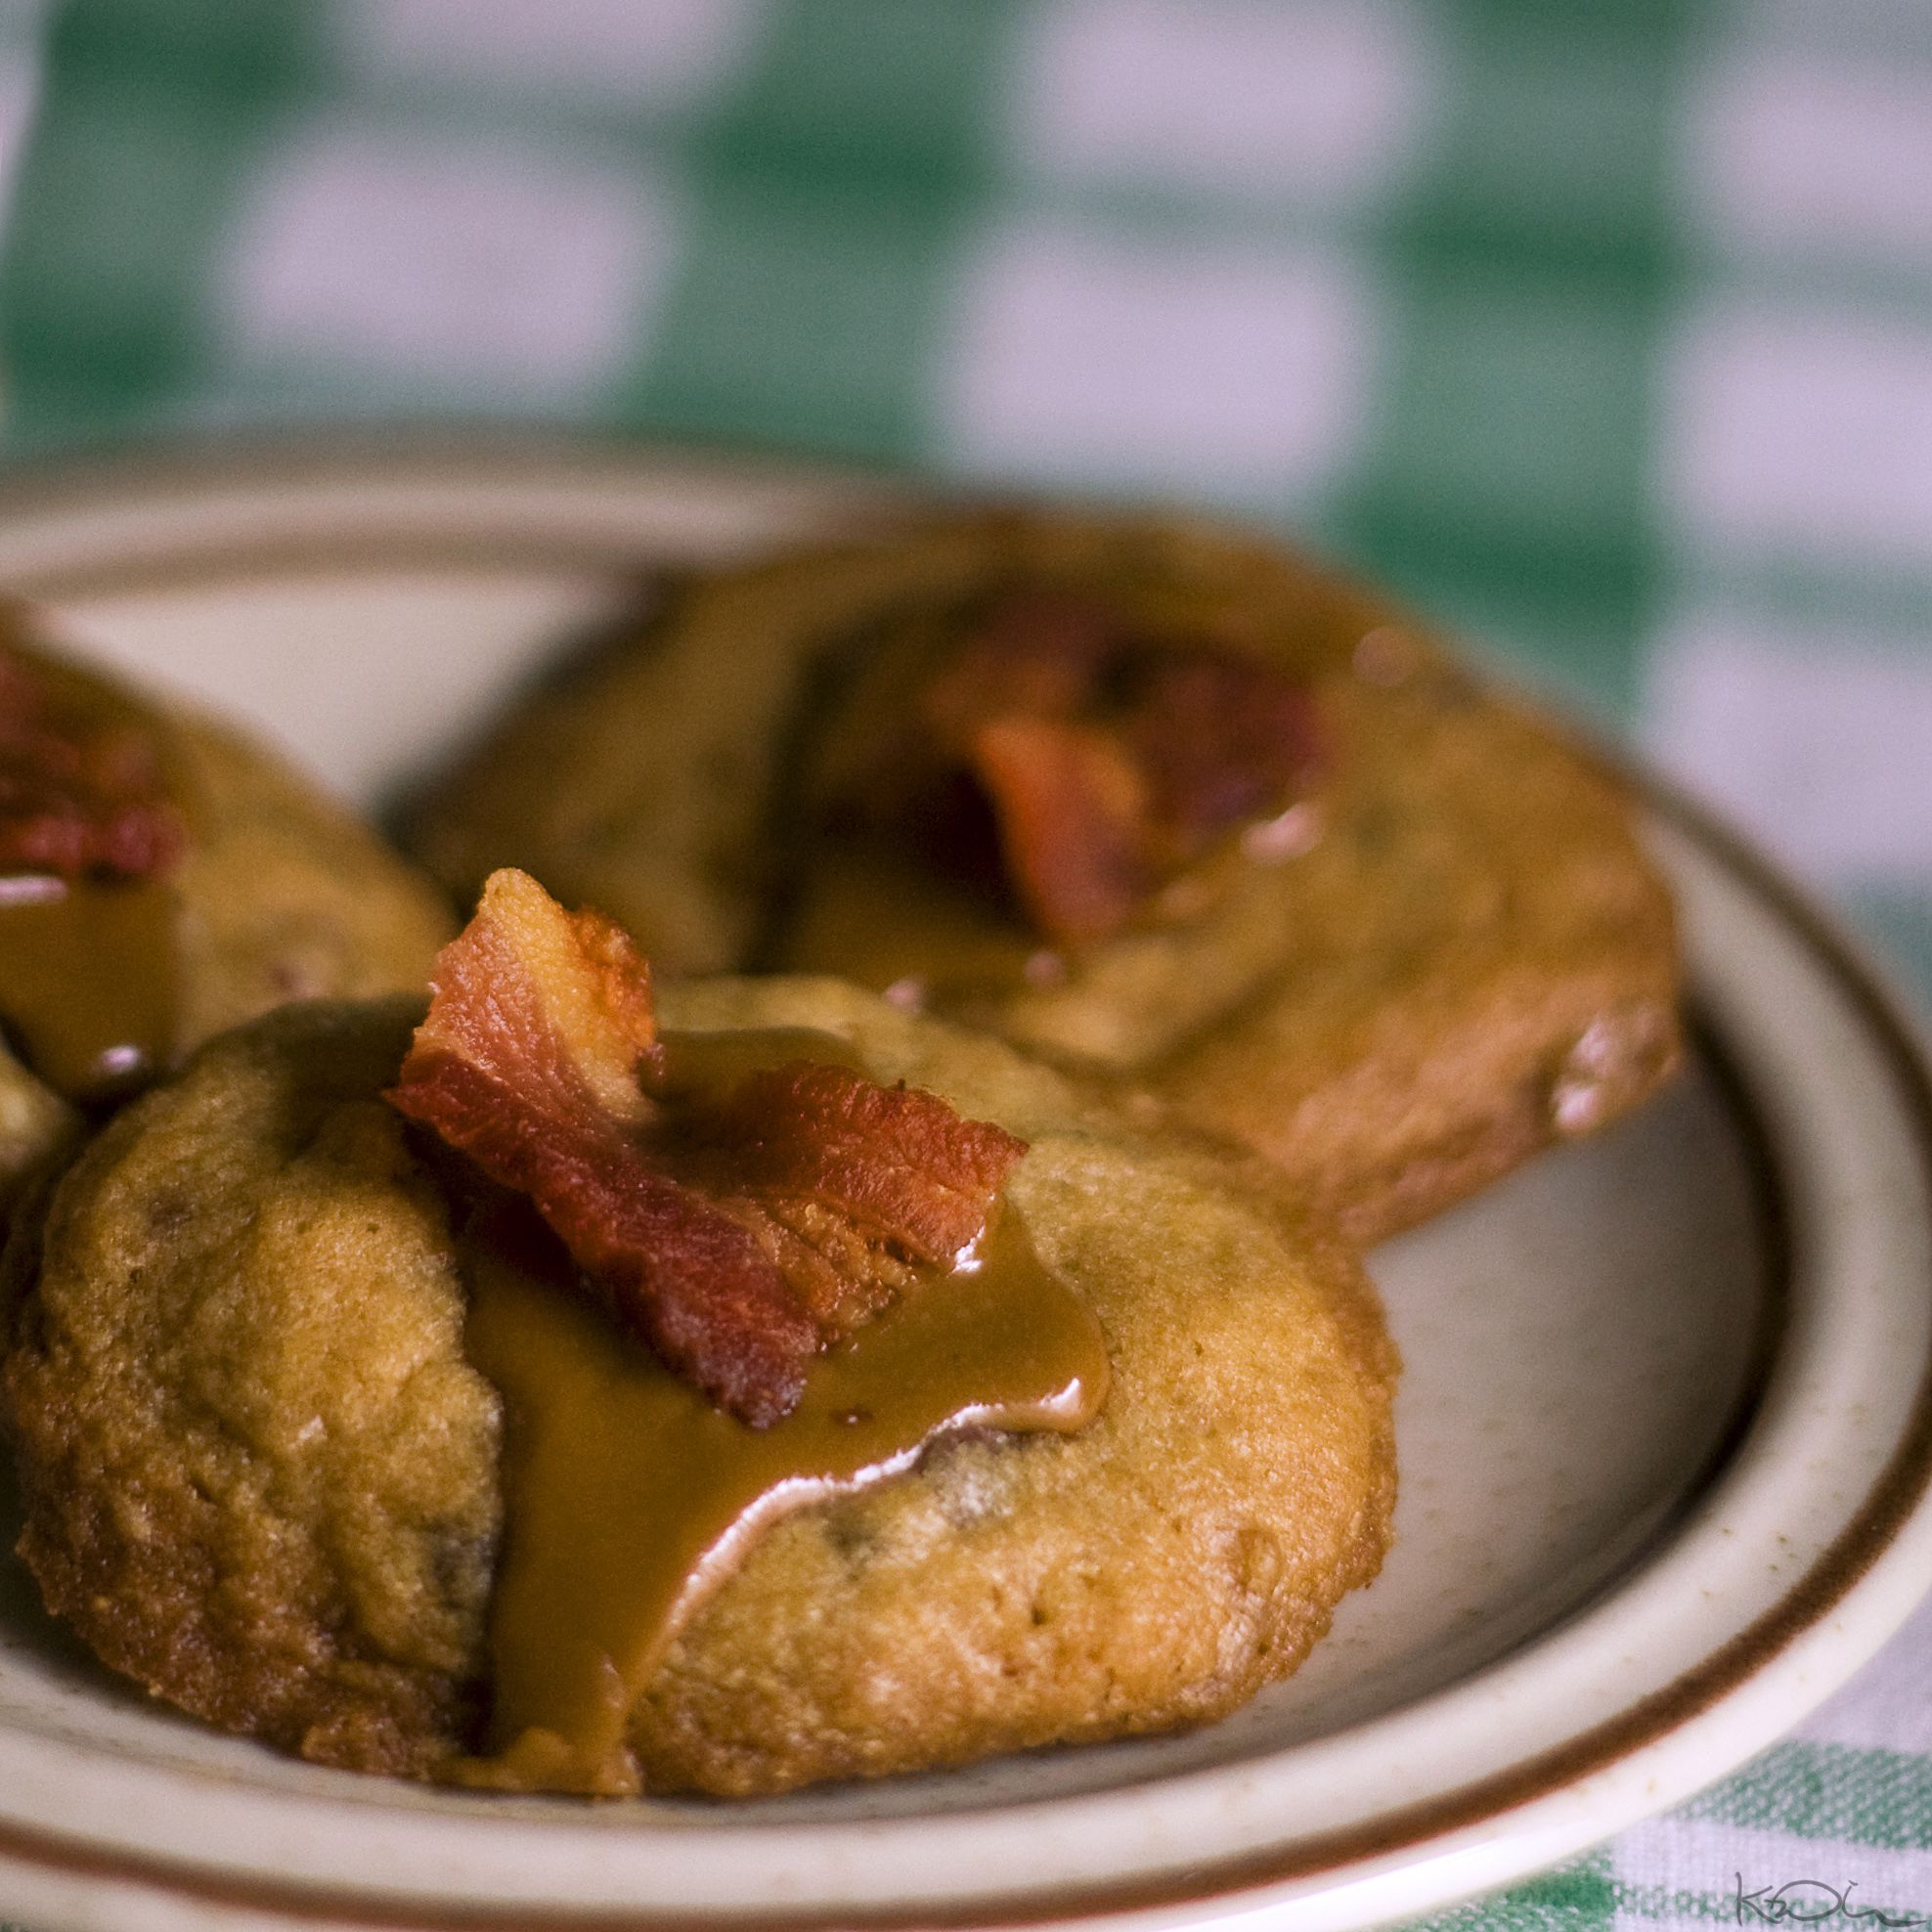 <p>Using bacon in sweets is <a href="https://blog.cheapism.com/best-bacon-dishes-17481/">a trend that has thankfully stuck around</a>. The interplay of the umami-rich and salty bacon offsets the sweet chocolate, making all the flavors pop. These piggy cookies are sure to be a welcome cap to barbecues and other savory meals.</p><p><b>Recipe:</b> <a href="https://www.seriouseats.com/bacon-chocolate-chip-cookies-recipe">Serious Eats</a></p><p><a href="https://blog.cheapism.com/-crazy-bacon-products/">The Craziest Bacon Products You Can Buy</a></p>